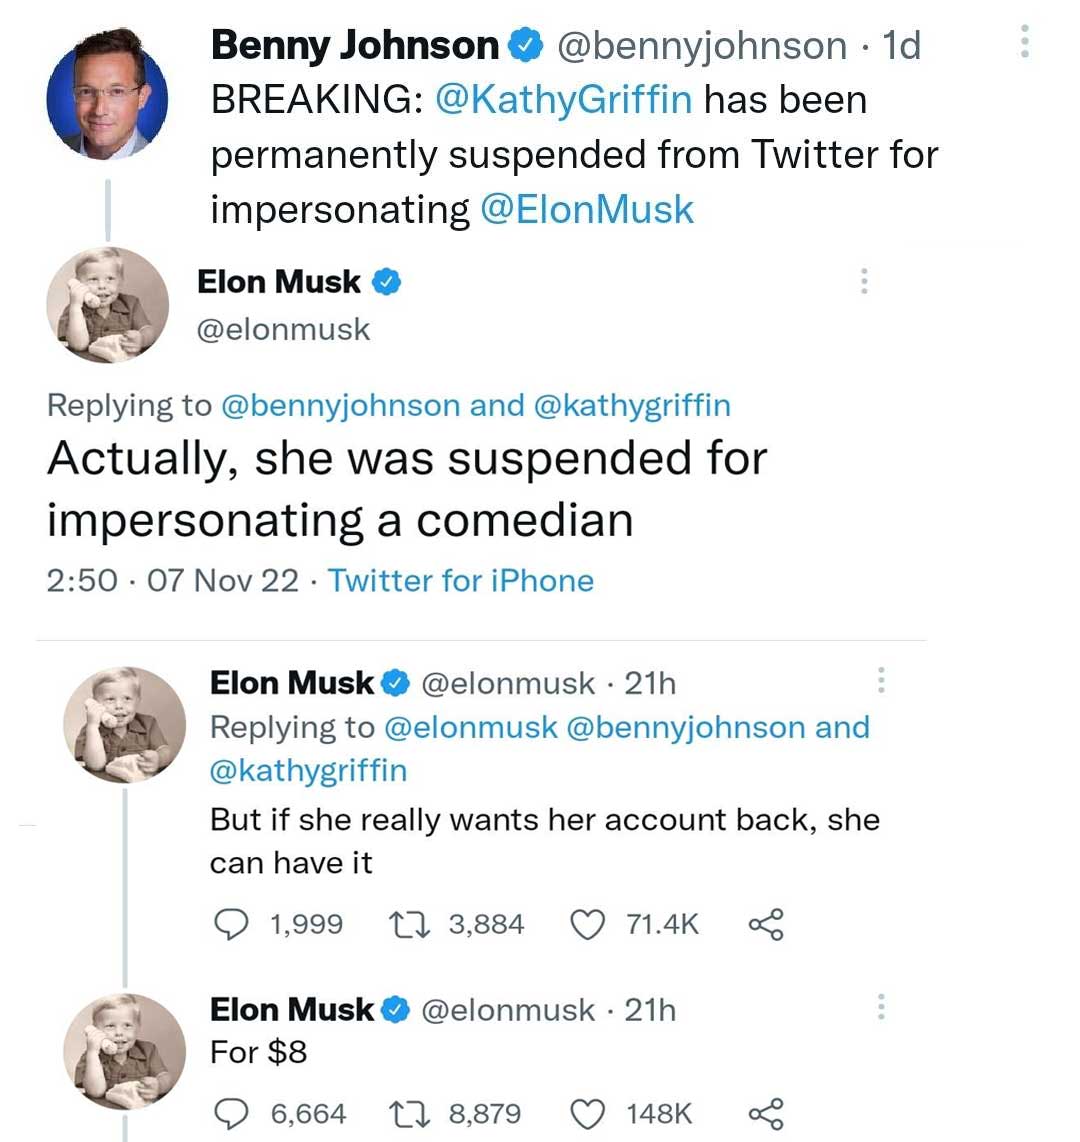 daily dose of pics and memes - body jewelry - Benny Johnson . 1d Breaking has been permanently suspended from Twitter for impersonating Elon Musk and Actually, she was suspended for impersonating a comedian 07 Nov 22 Twitter for iPhone Elon Musk 21h and B